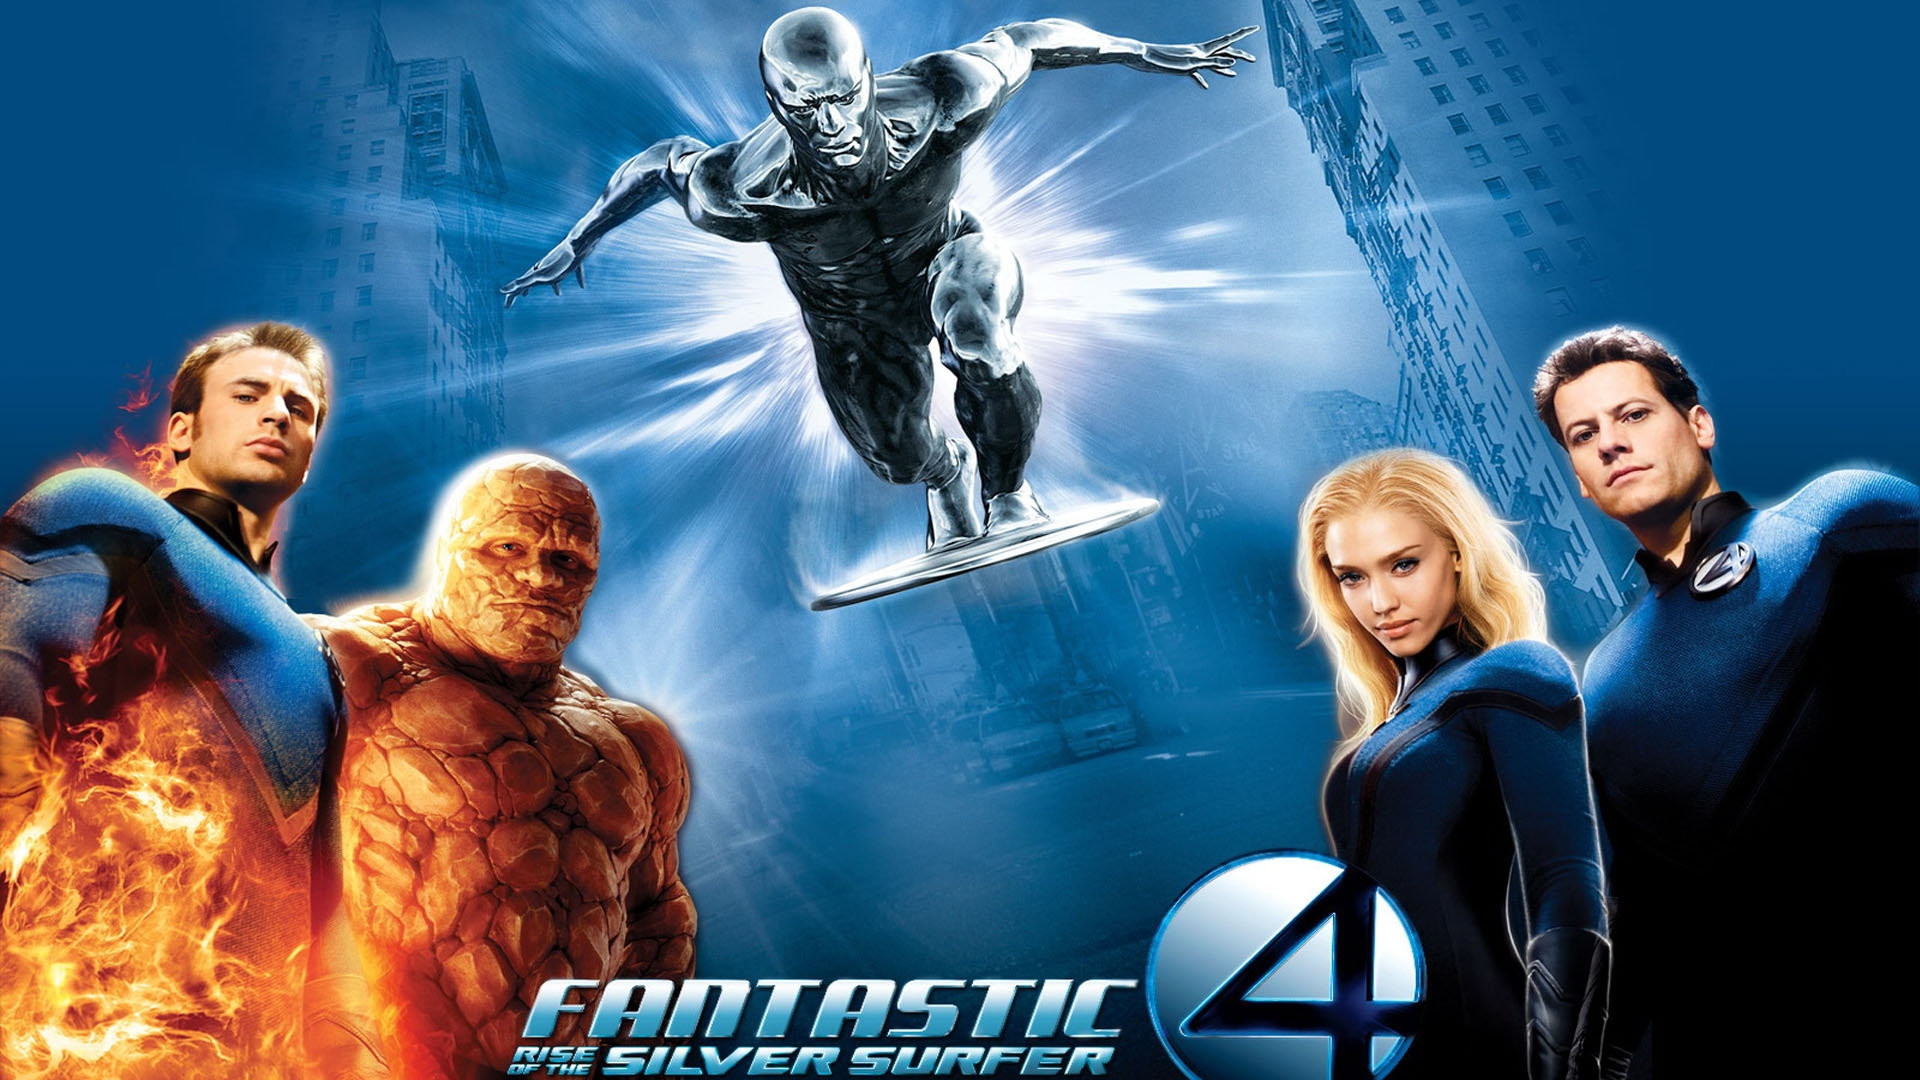 Download Wallpaper 1920x1080 fantastic rise of the silver surfer, team, mr fantastic, reed richards, invisible woman, susan storm, human torch, johnny storm, the thing, ben grimm Full HD 1080p HD Background